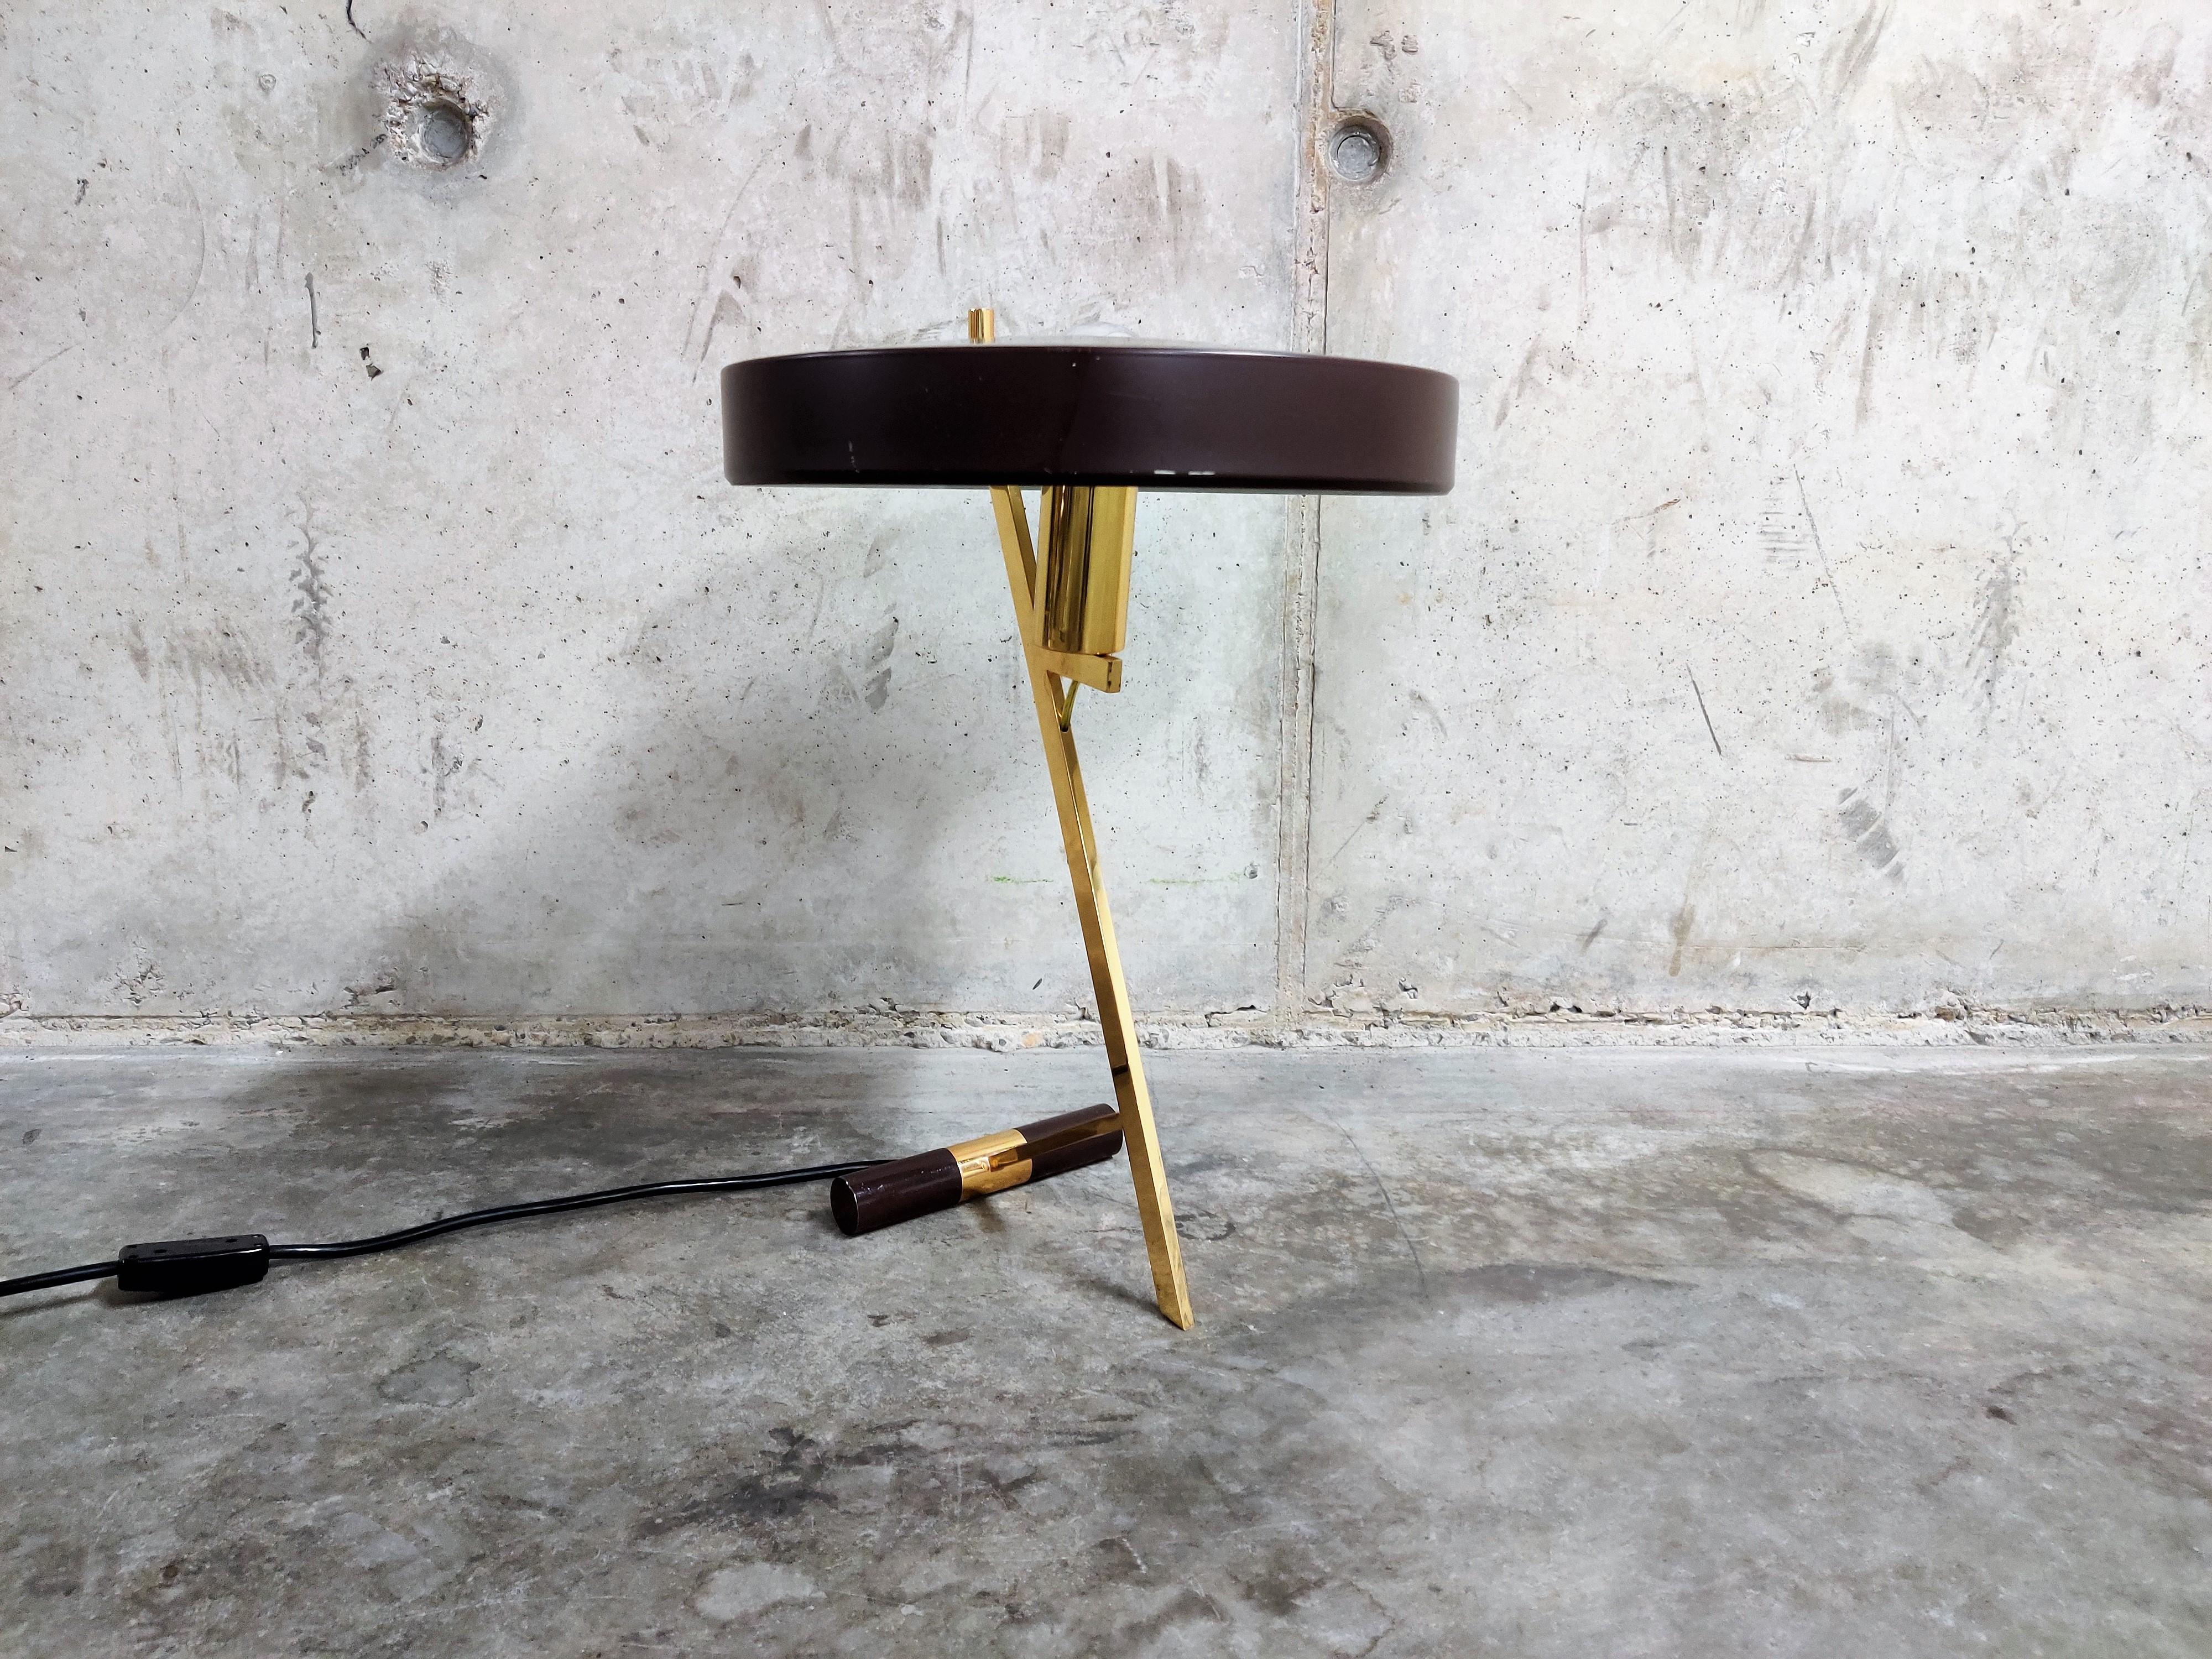 Rare brown version of the Z model or 'diplomat' table lamp designed by Louis Kalff for Philips.

This model is one of Louis Kalff's best designs.

It features a brass Z shaped base with a single light point.

The shade is made of enameled